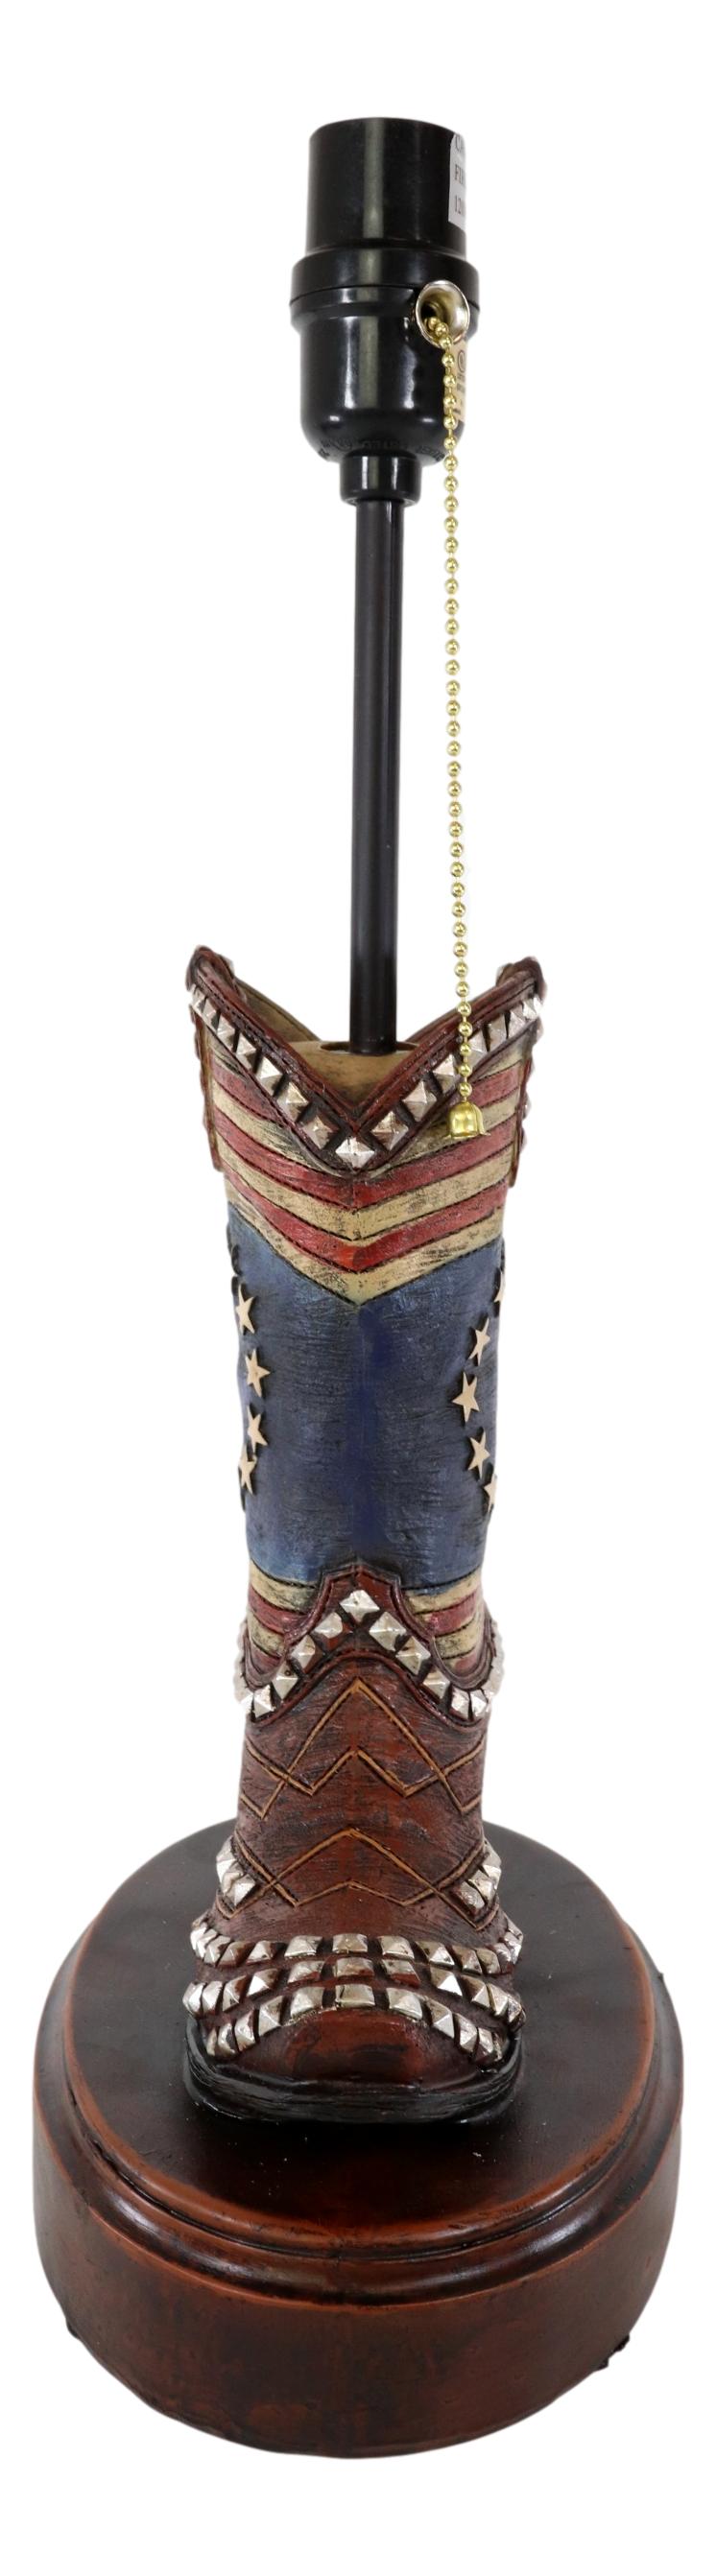 Western Patriotic American Flag Stars Stripes Cowboy Boot Table Lamp With Shade